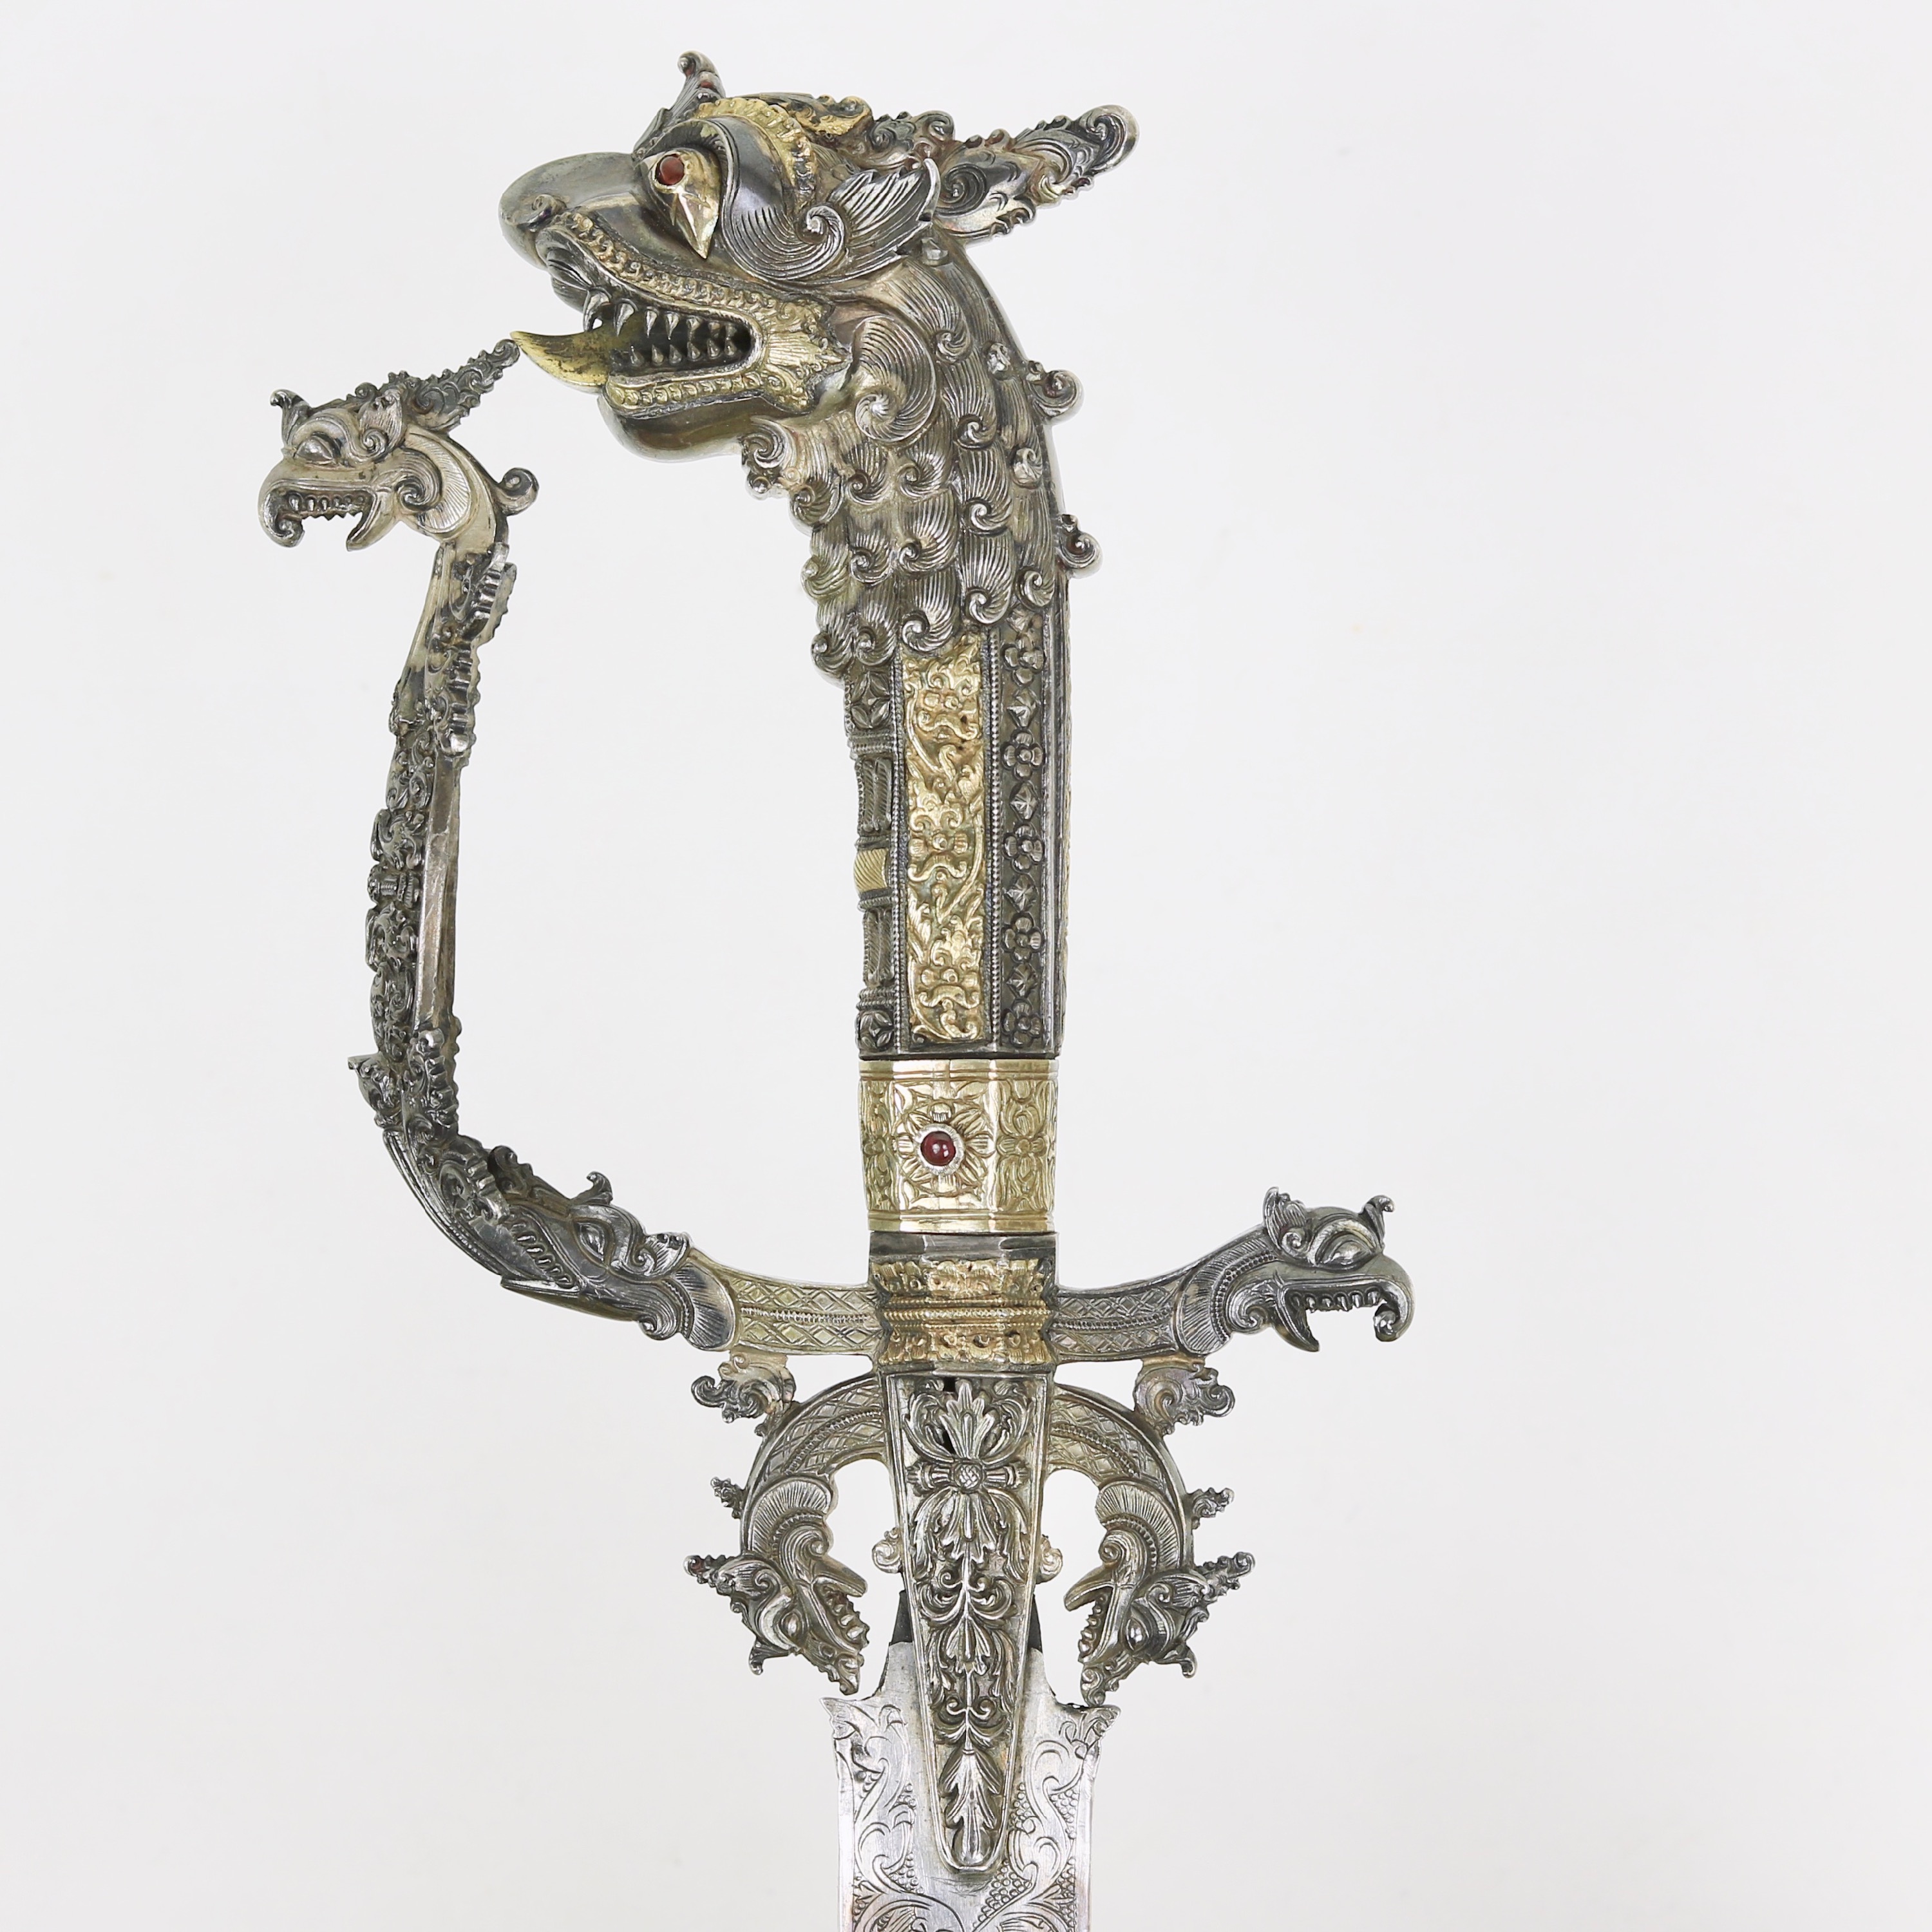 Quillons on Sinhalese sword